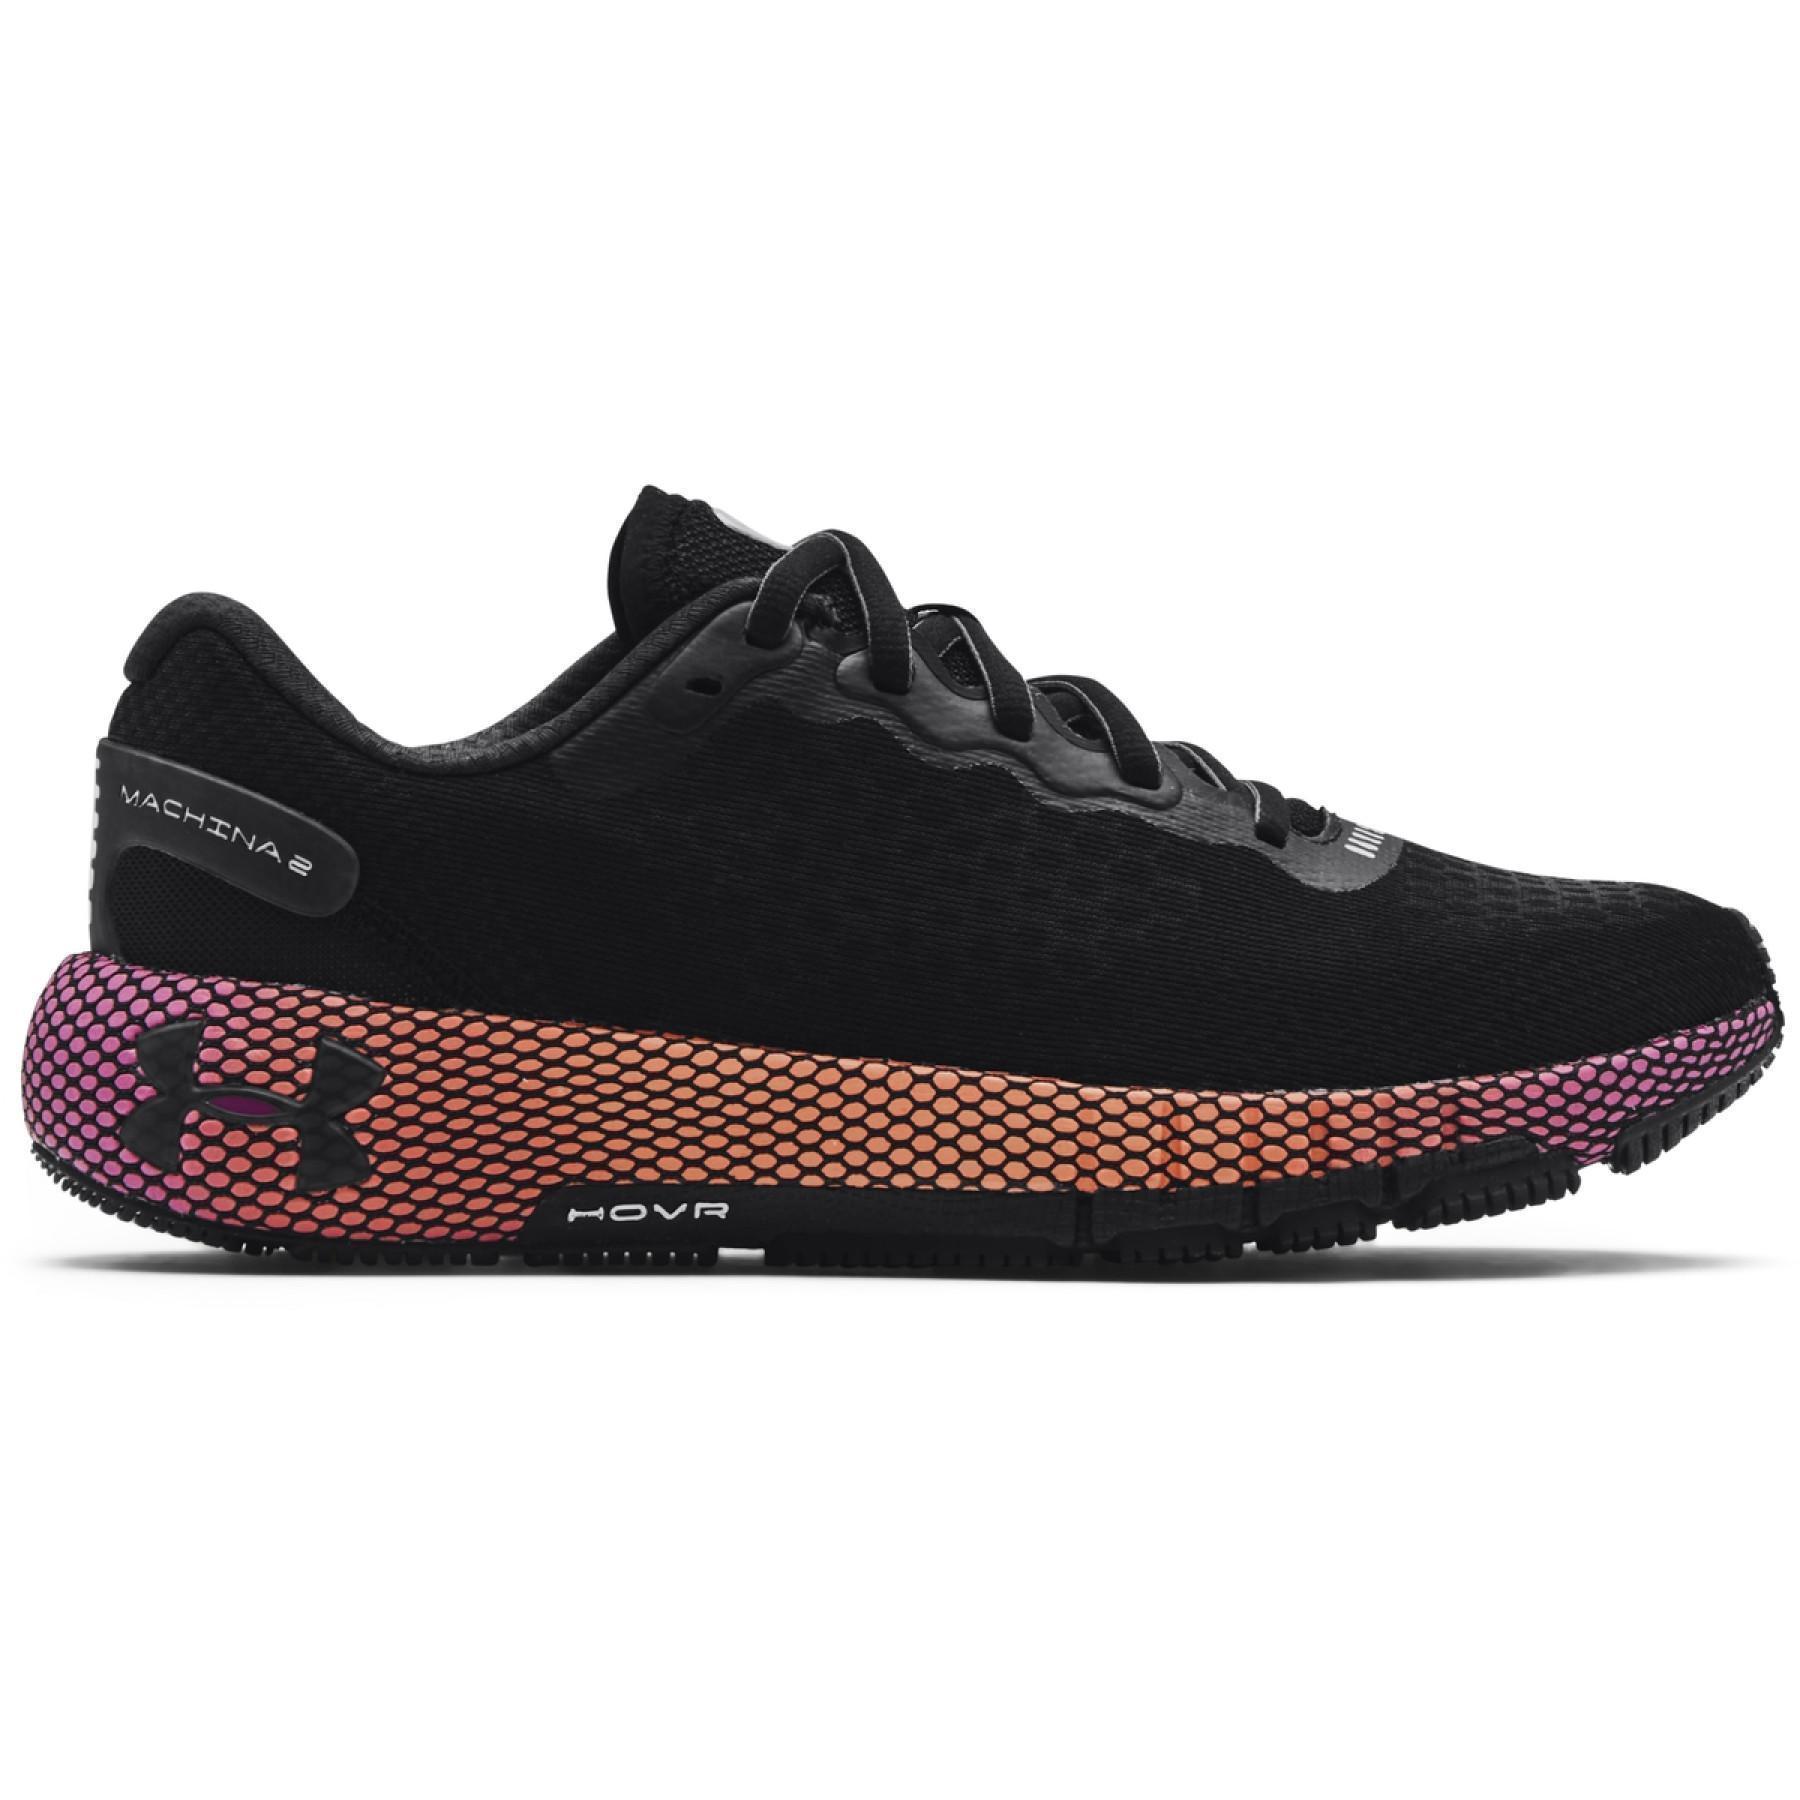 Women's running shoes Under Armour HOVR Machina 2 Colorshift